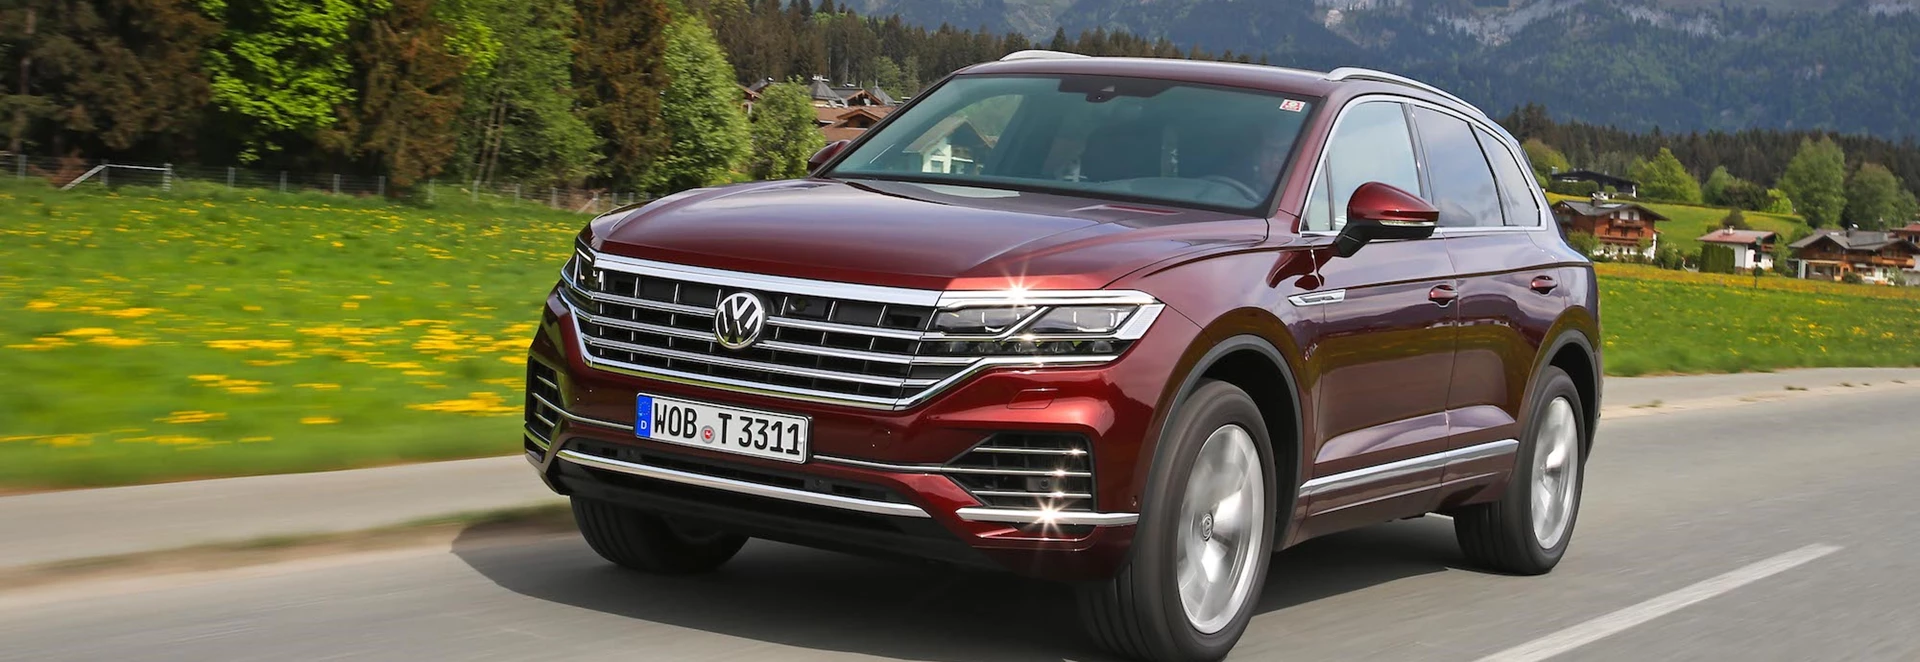 What it's like to drive the new 2018 Volkswagen Touareg